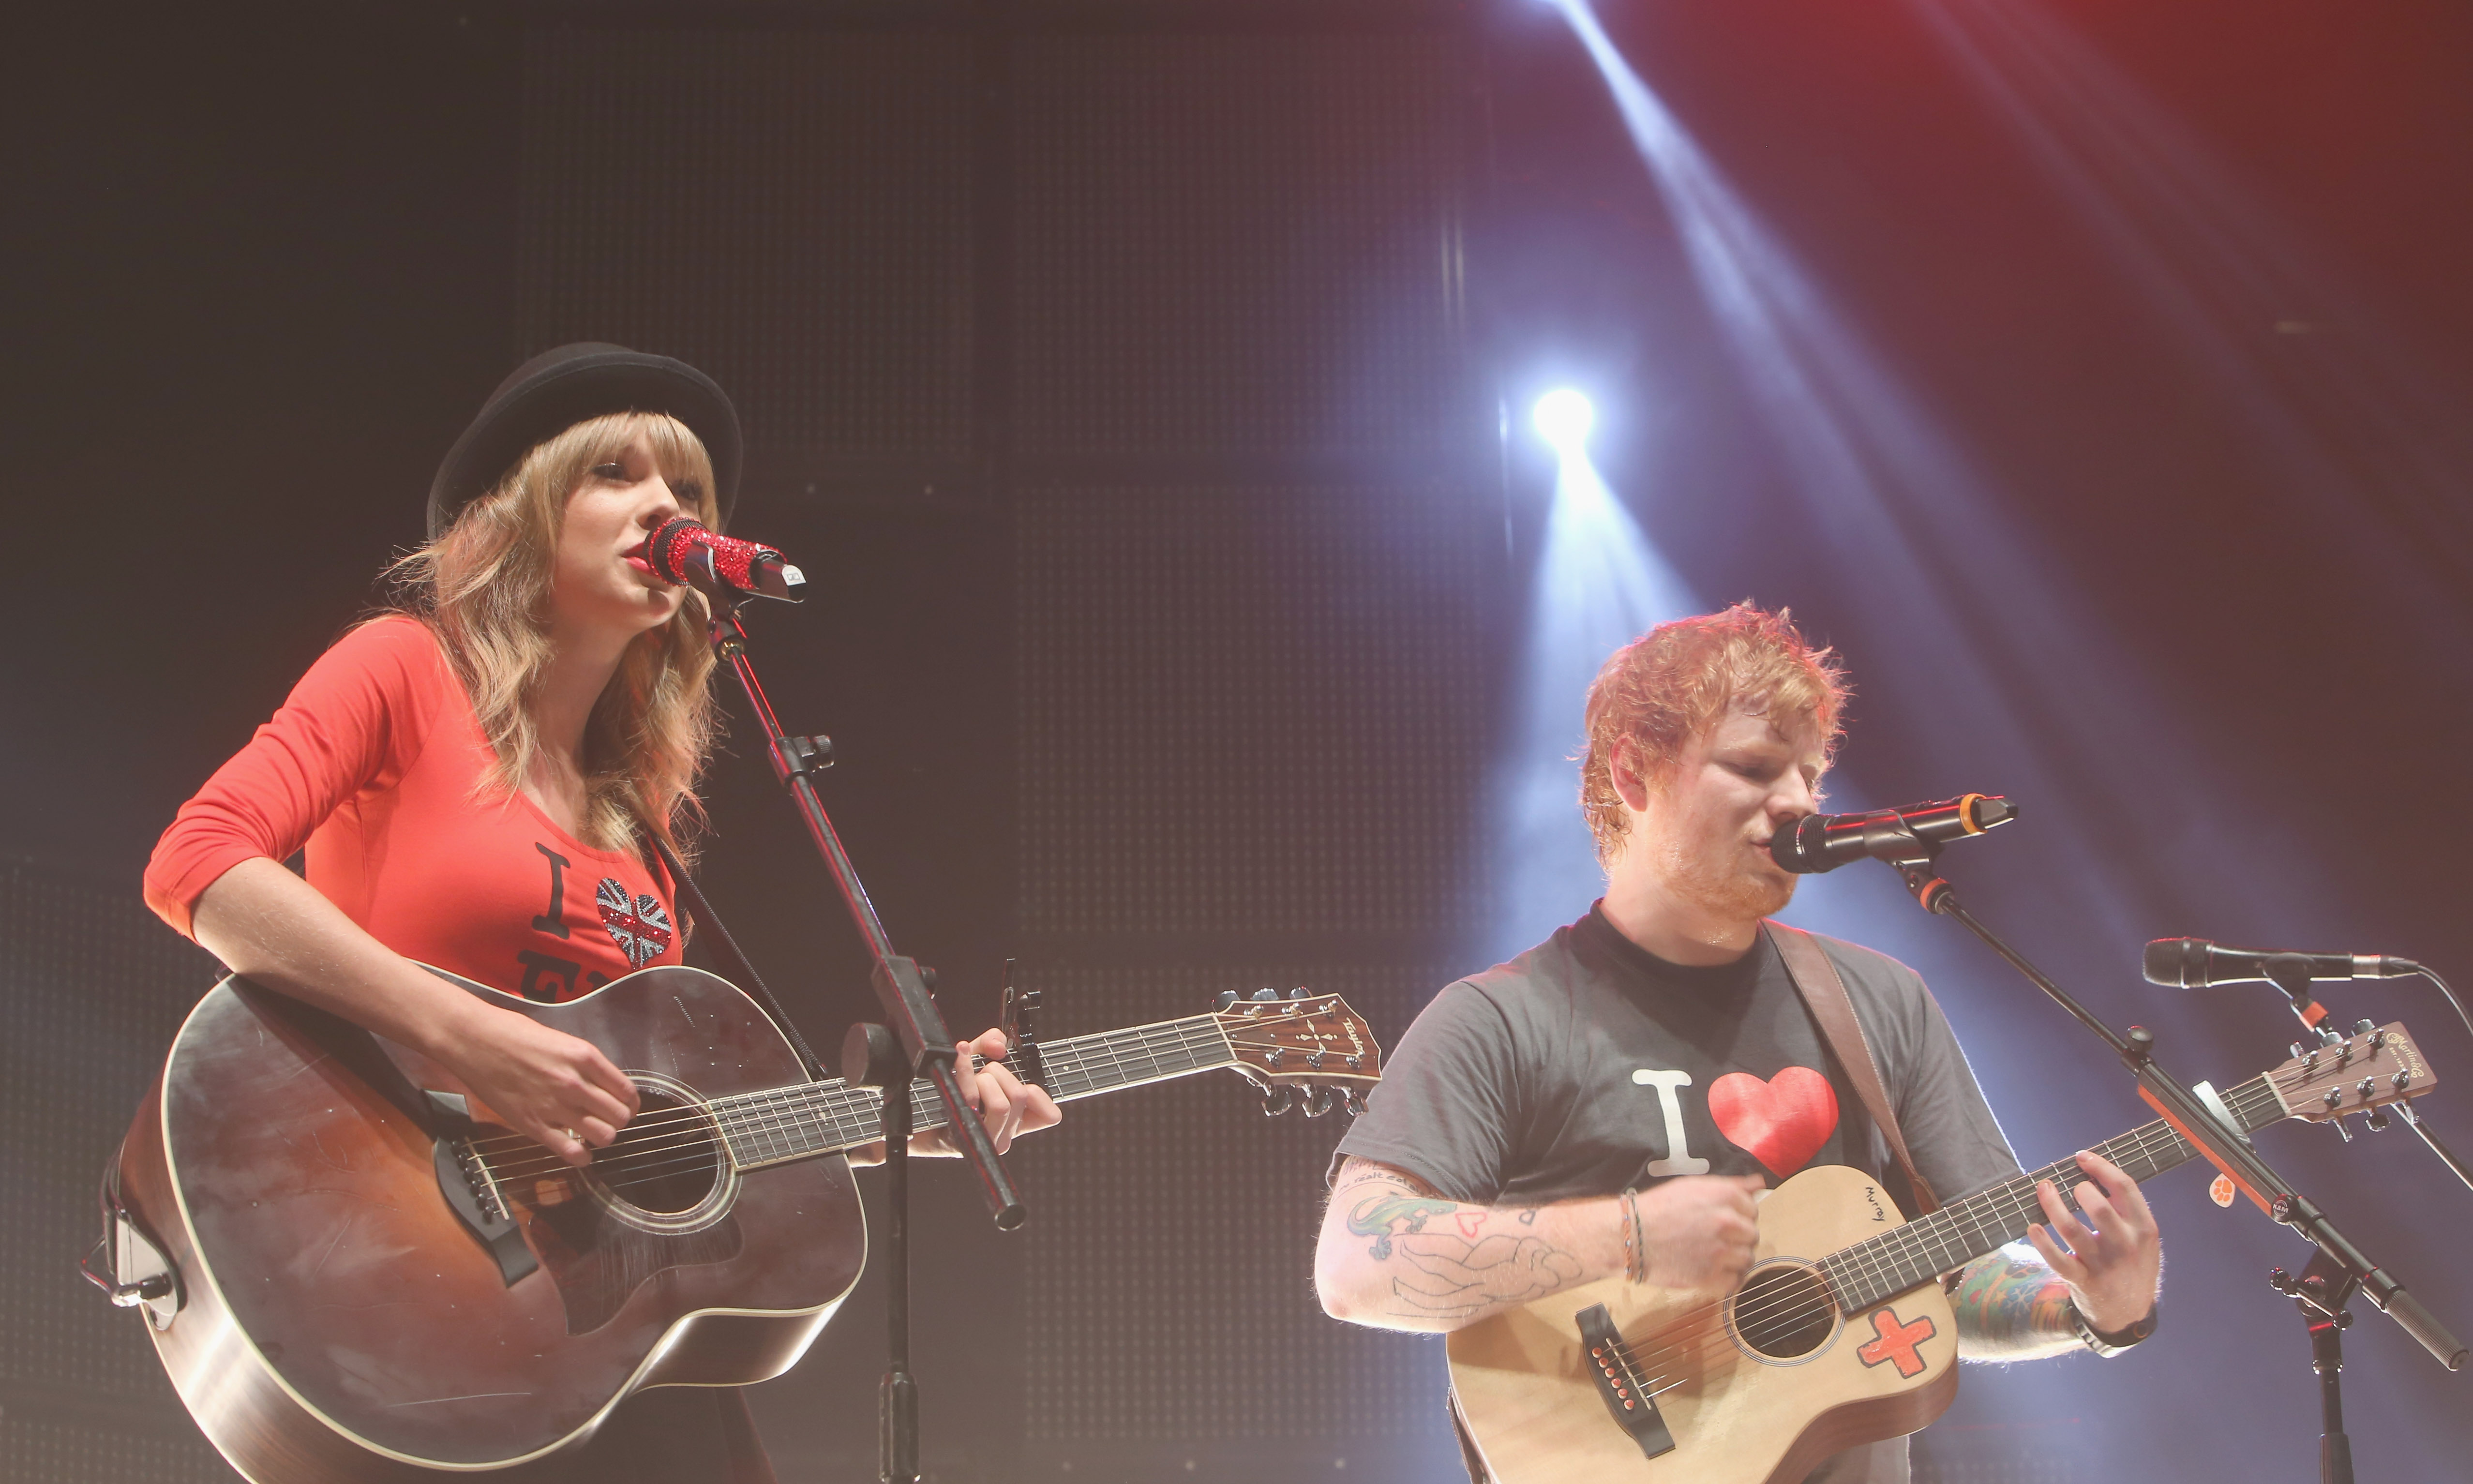 Taylor Swift joins Ed Sheeran on stage at his sold-out show at Madison Square Garden Arena on November 1, 2013 in New York City.